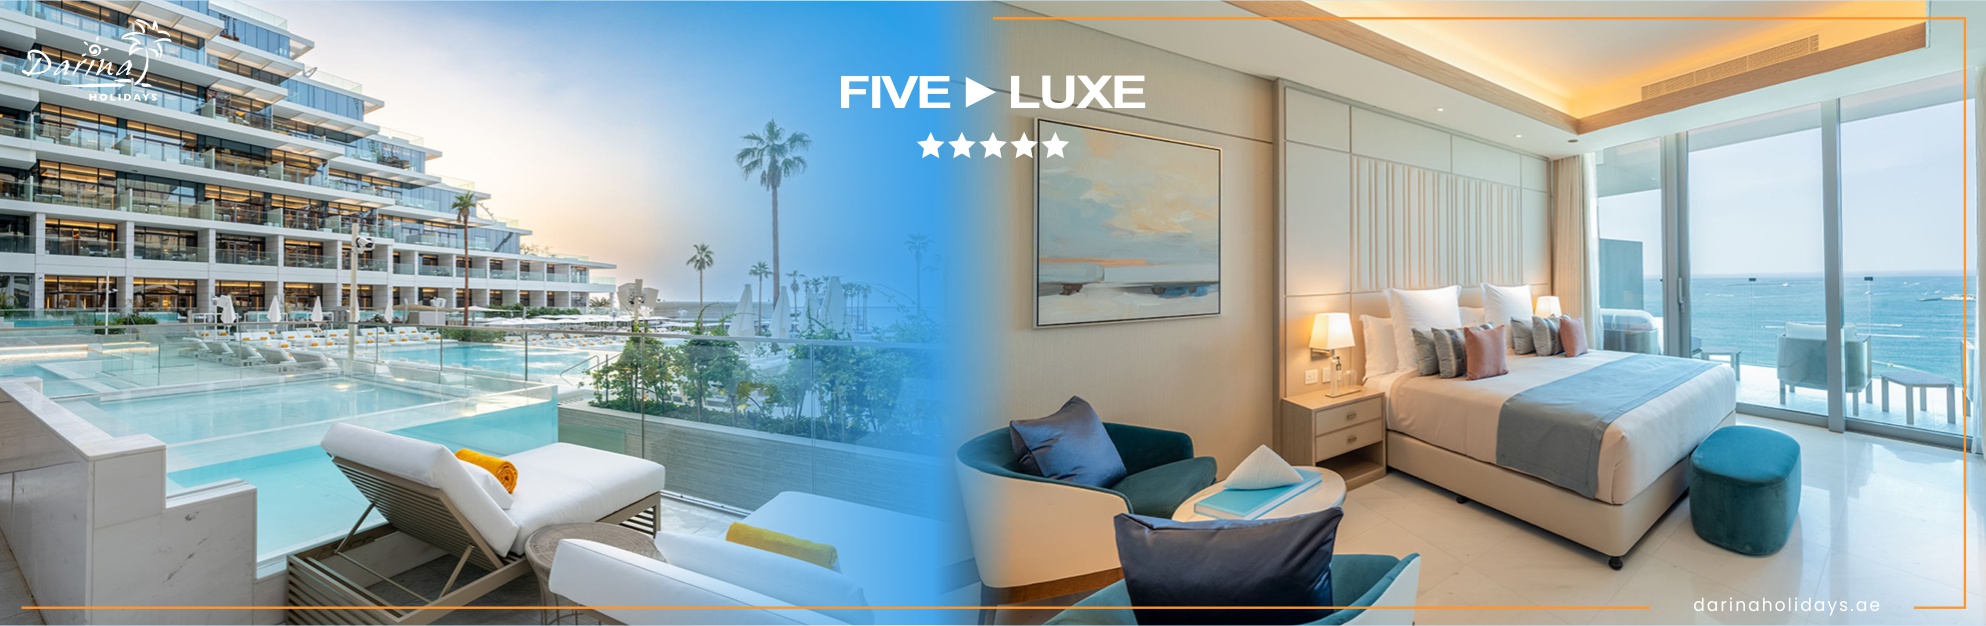 Five Luxe